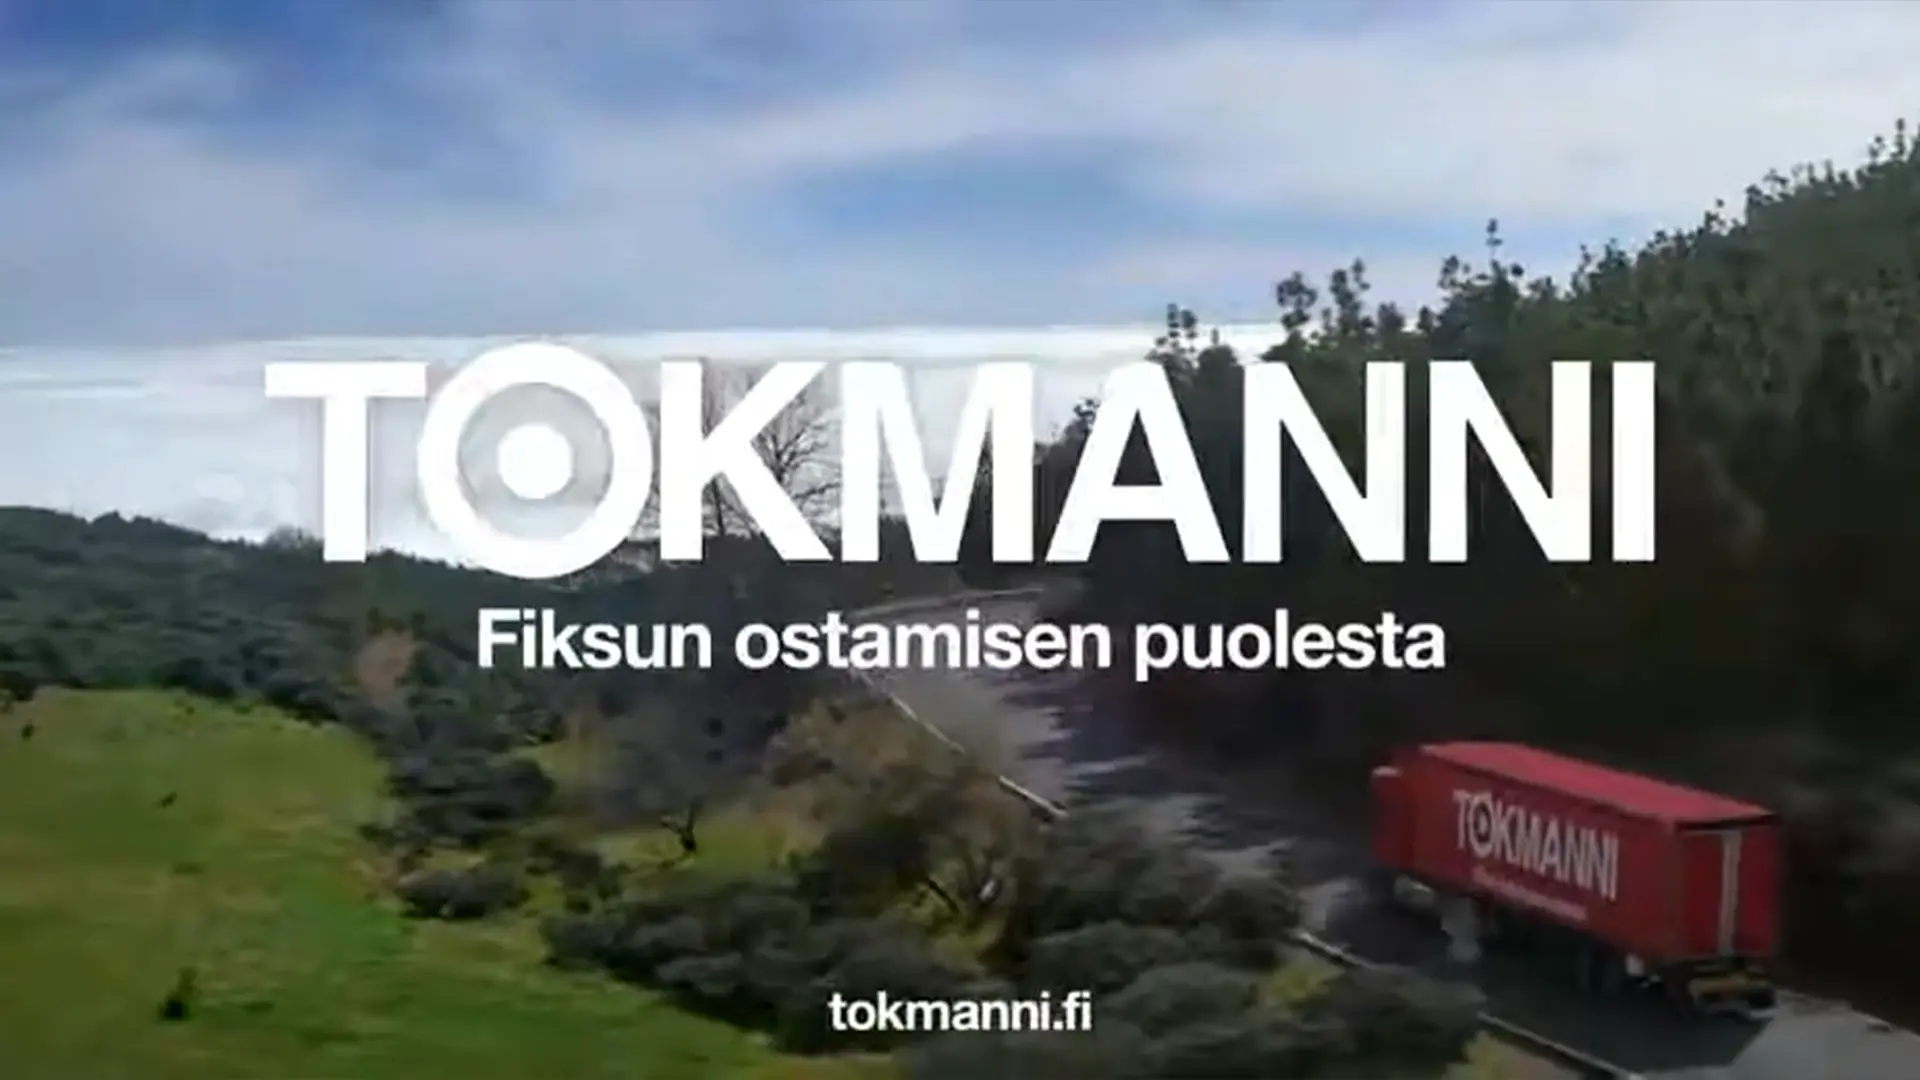 Commercial Tokmanni 2017